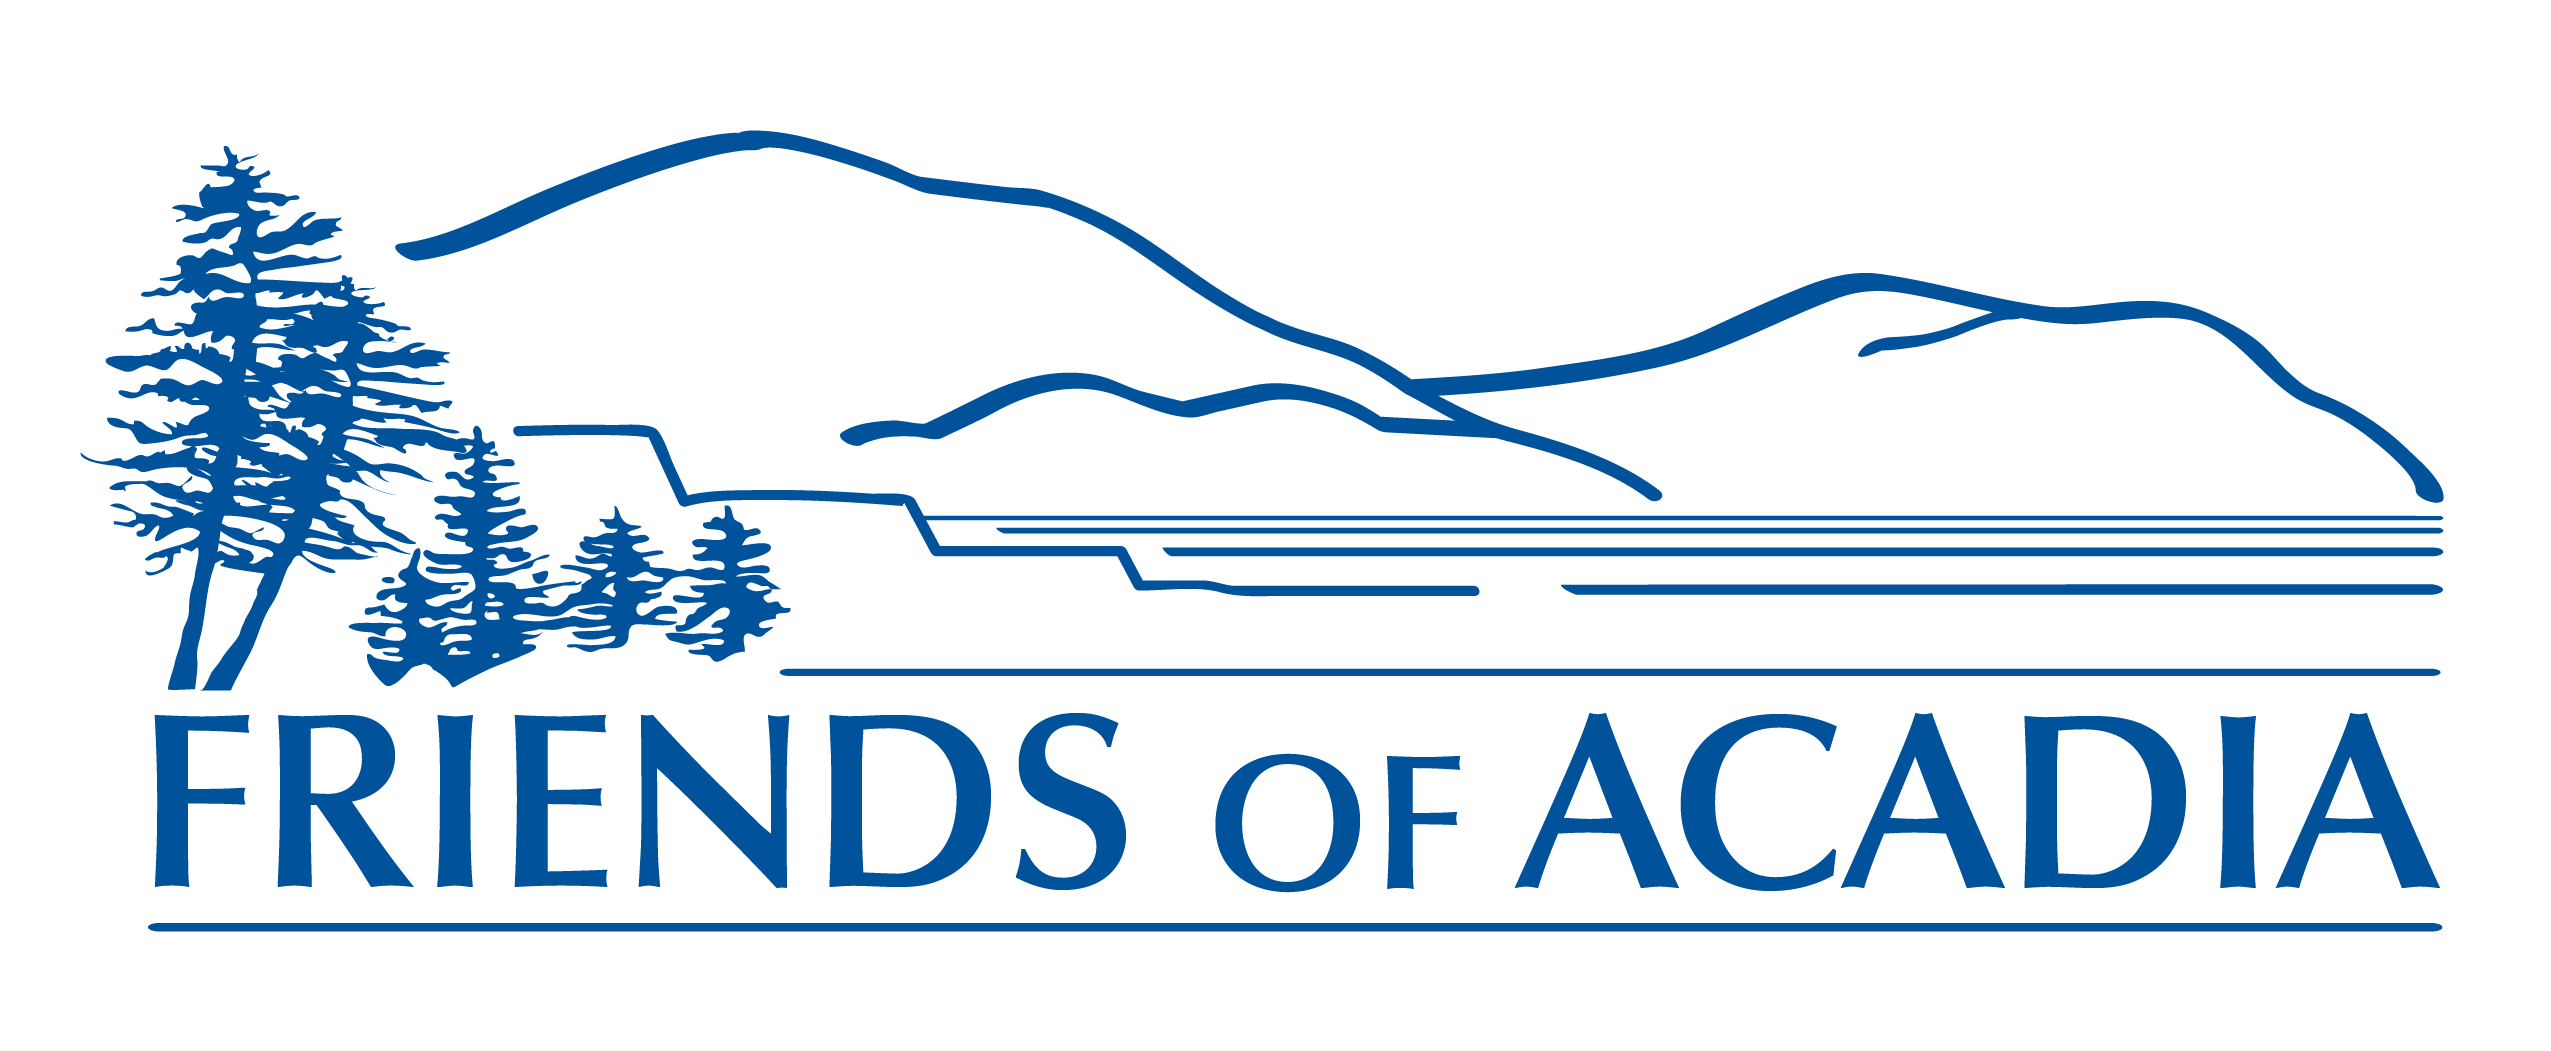 Friends of Acadia: Digital Marketing Manager